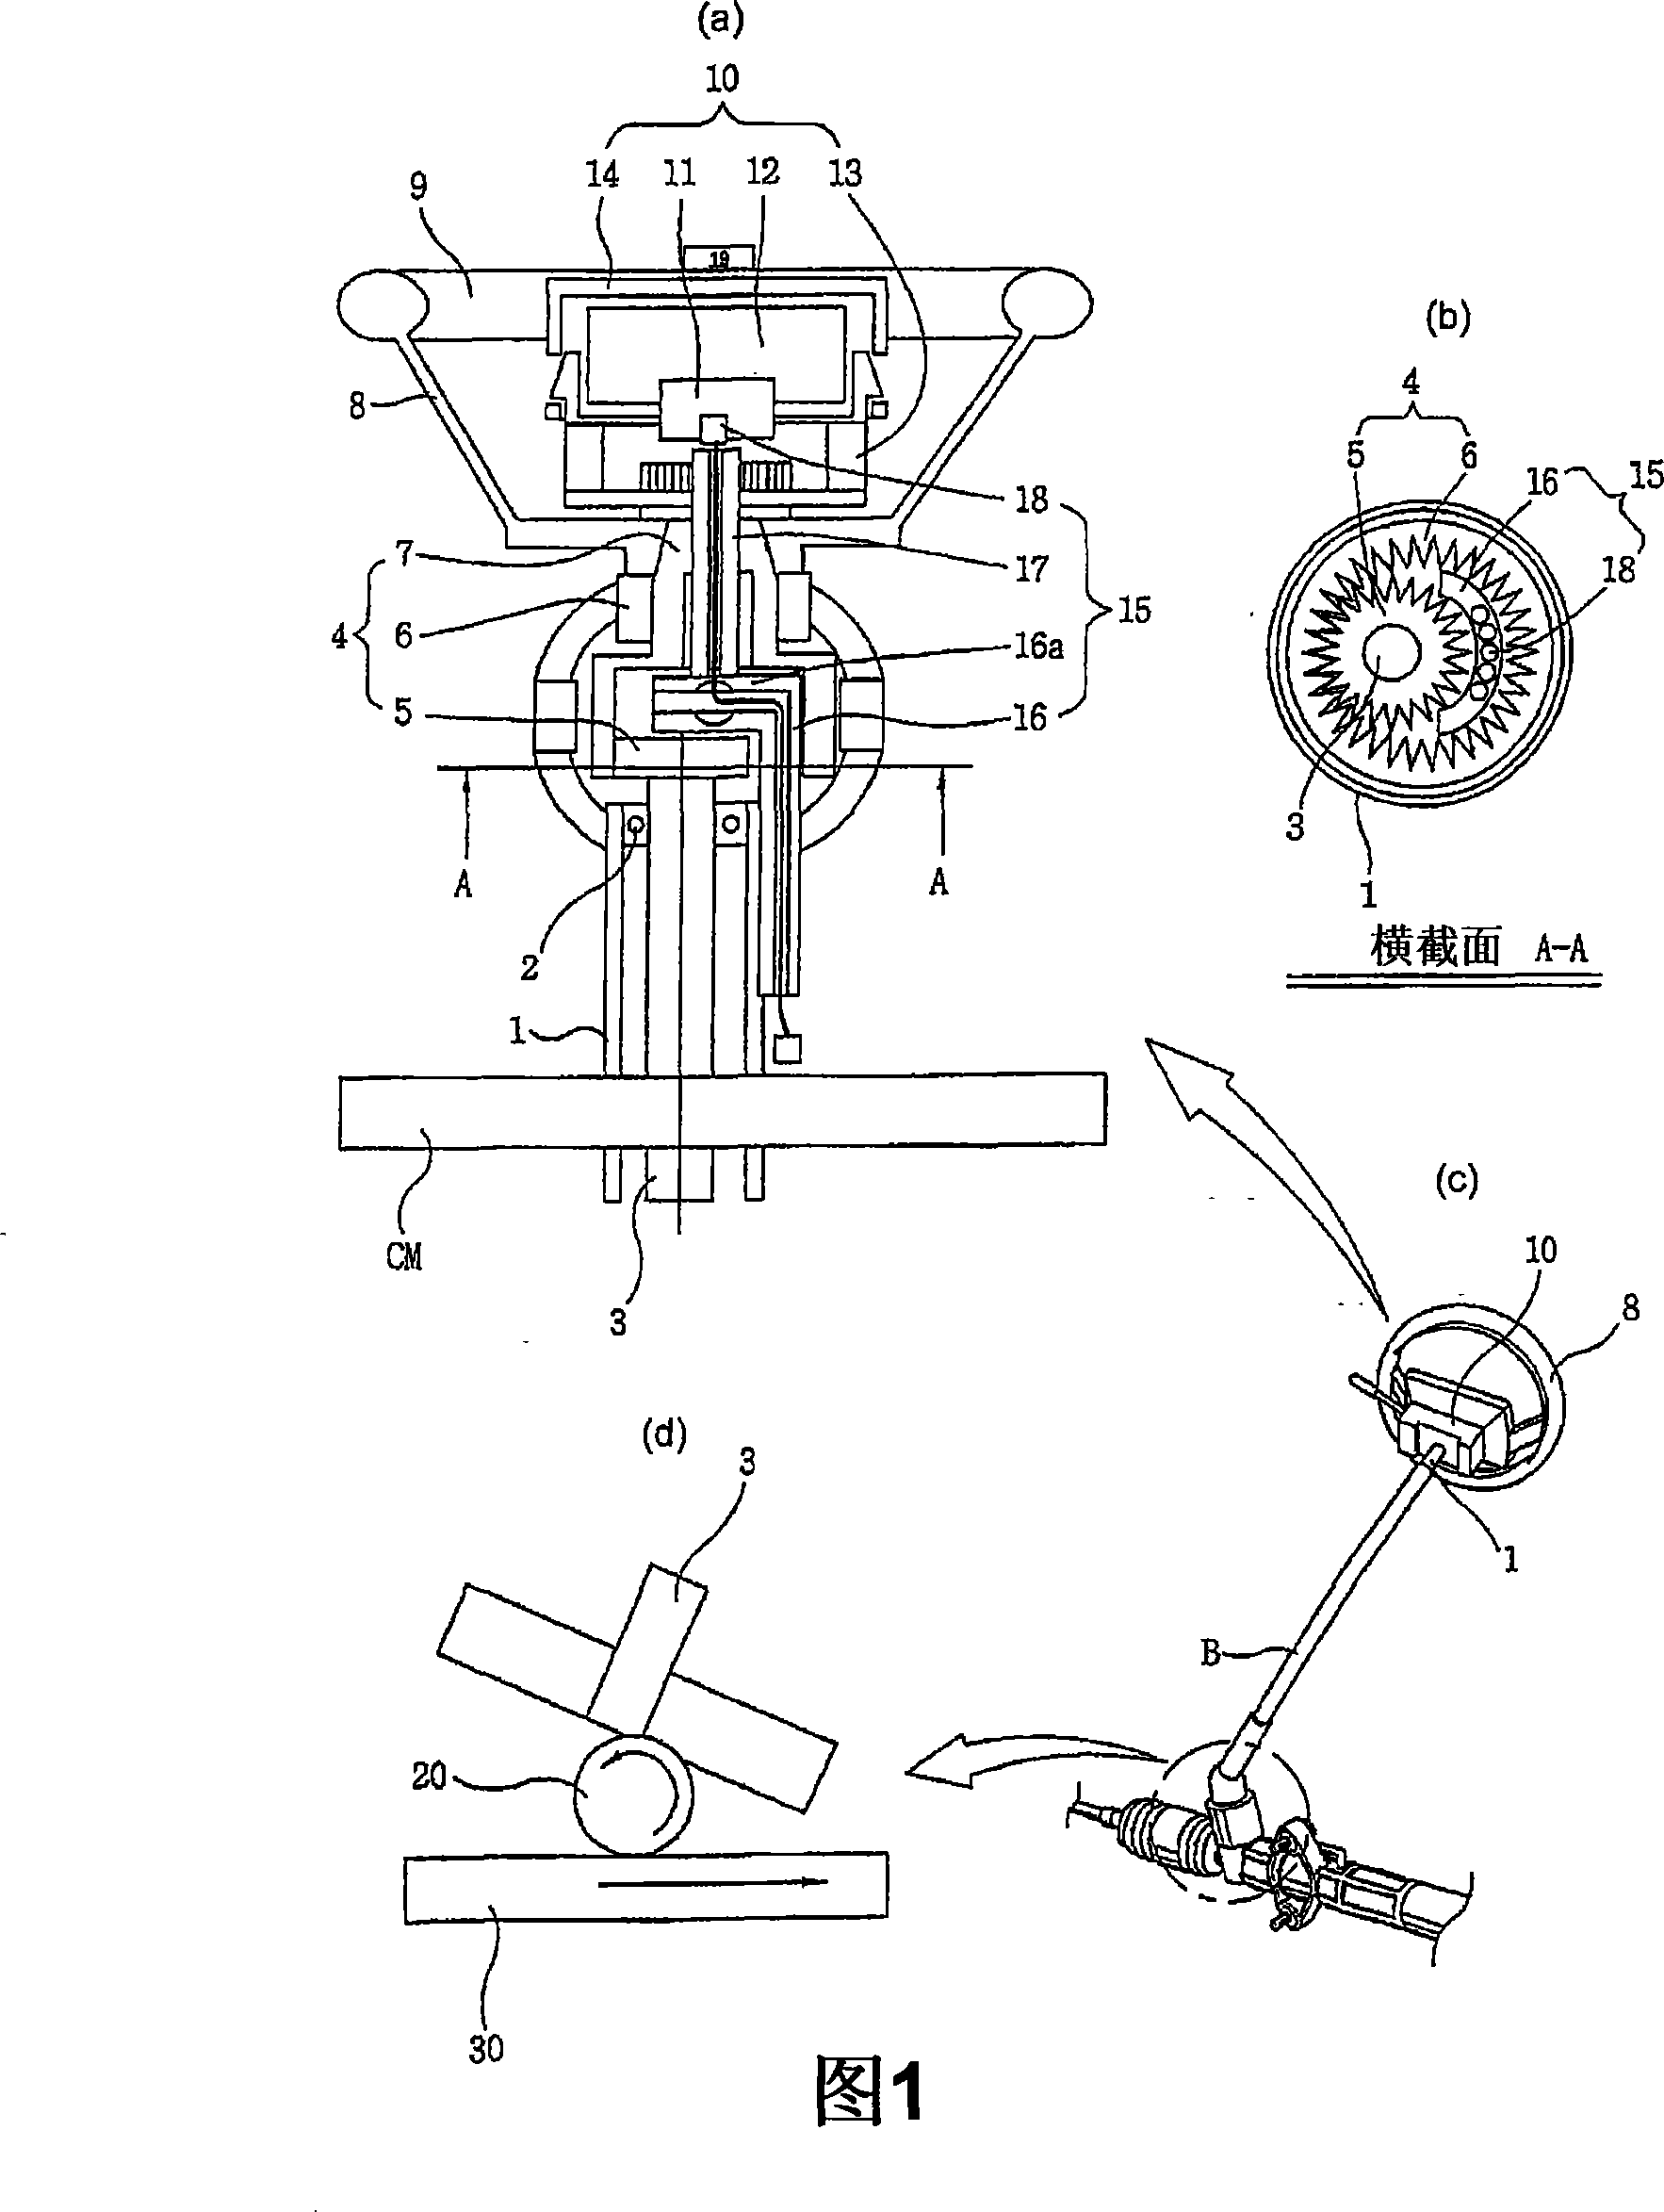 Vehicle steering system including irrotational airbag module